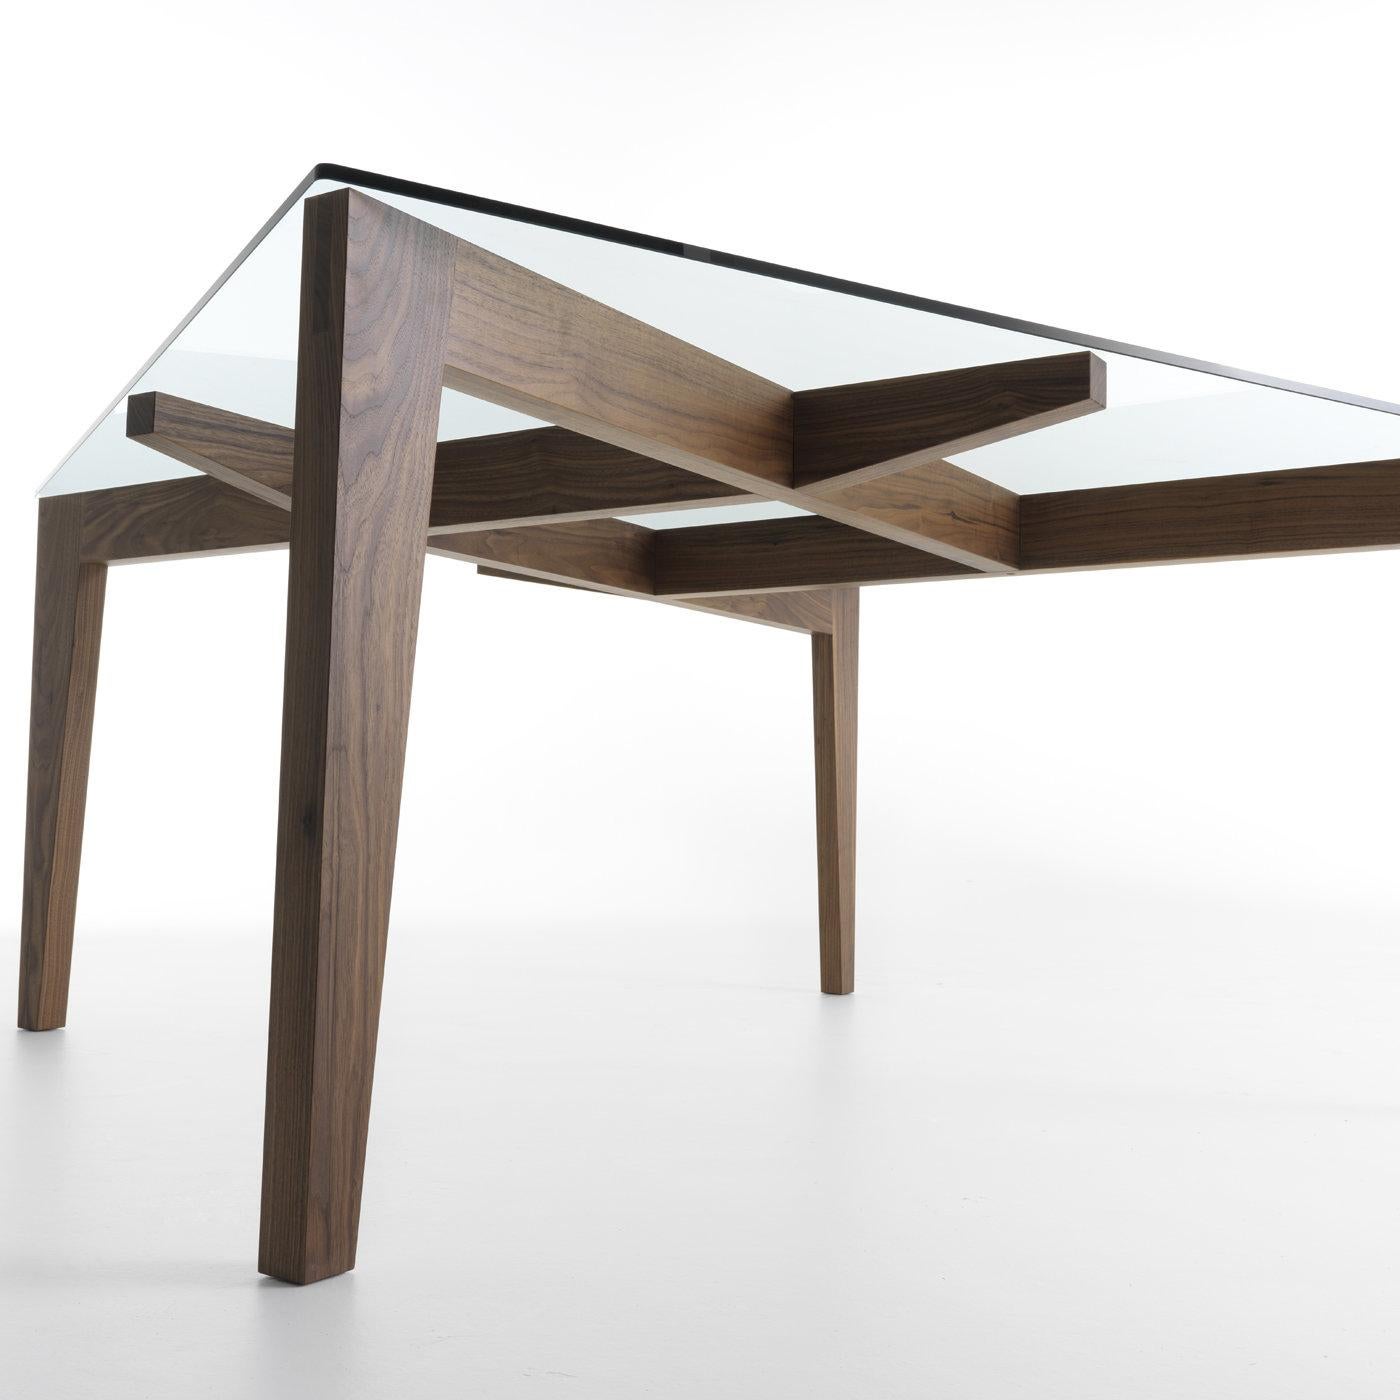 A striking sculptural work of art designed by Patrizia Bertolini, this dining table is named after the innovative structure that allows it to firmly stands on its own (